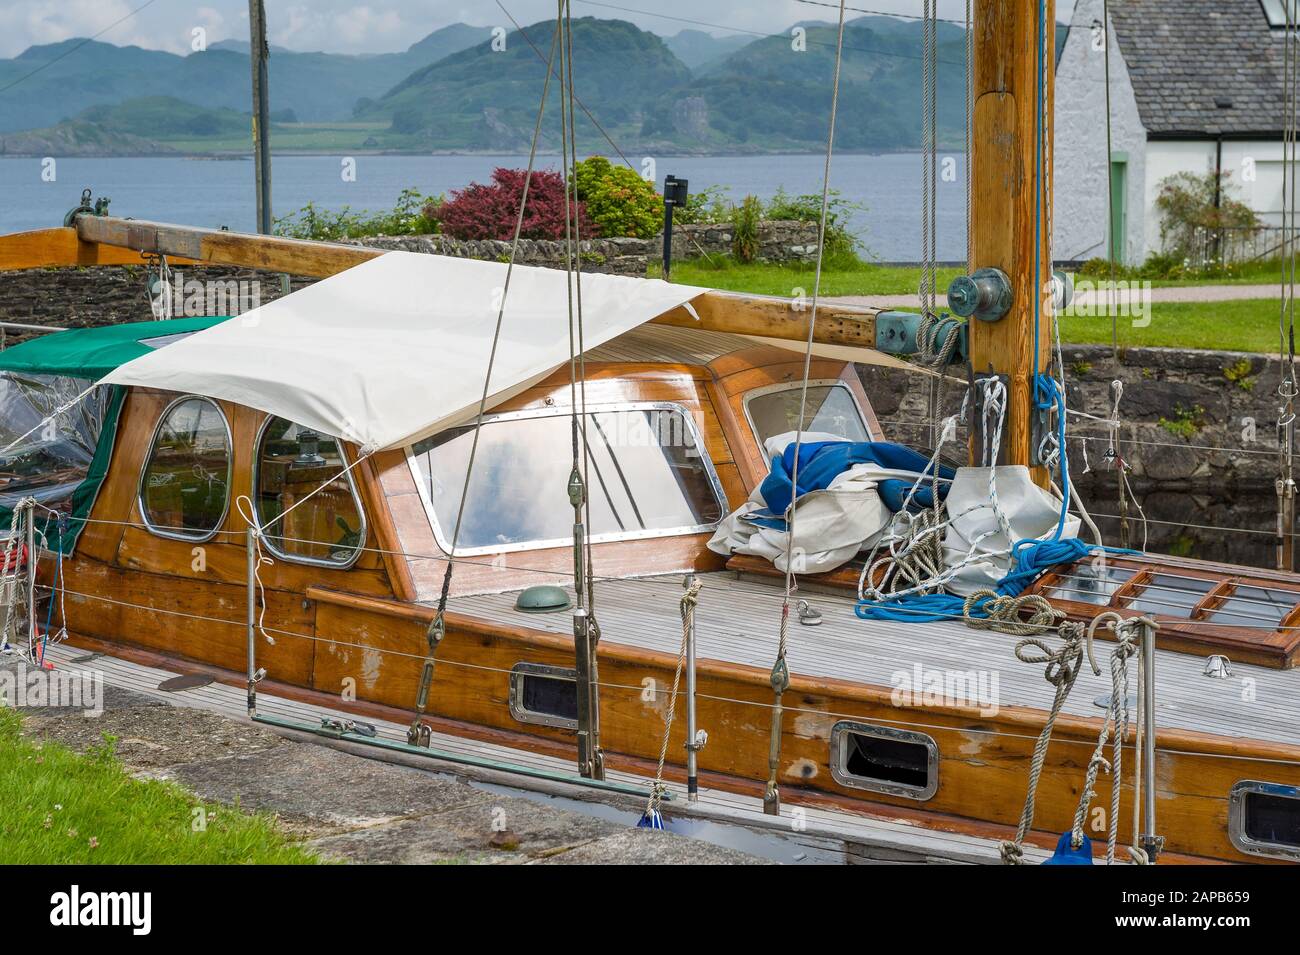 Old wooden boat, classical retro style. Crinan canal, Scotland. Stock Photo